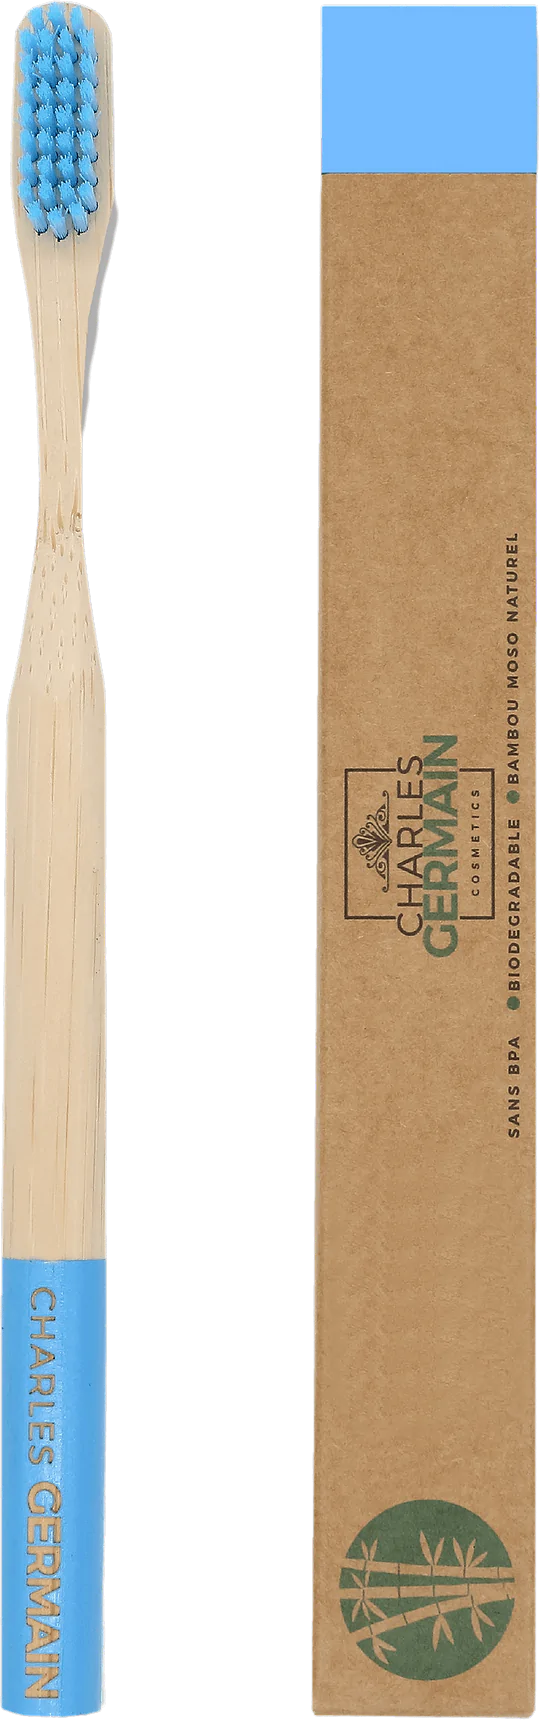 Blue Biodegradable Bamboo Toothbrush 